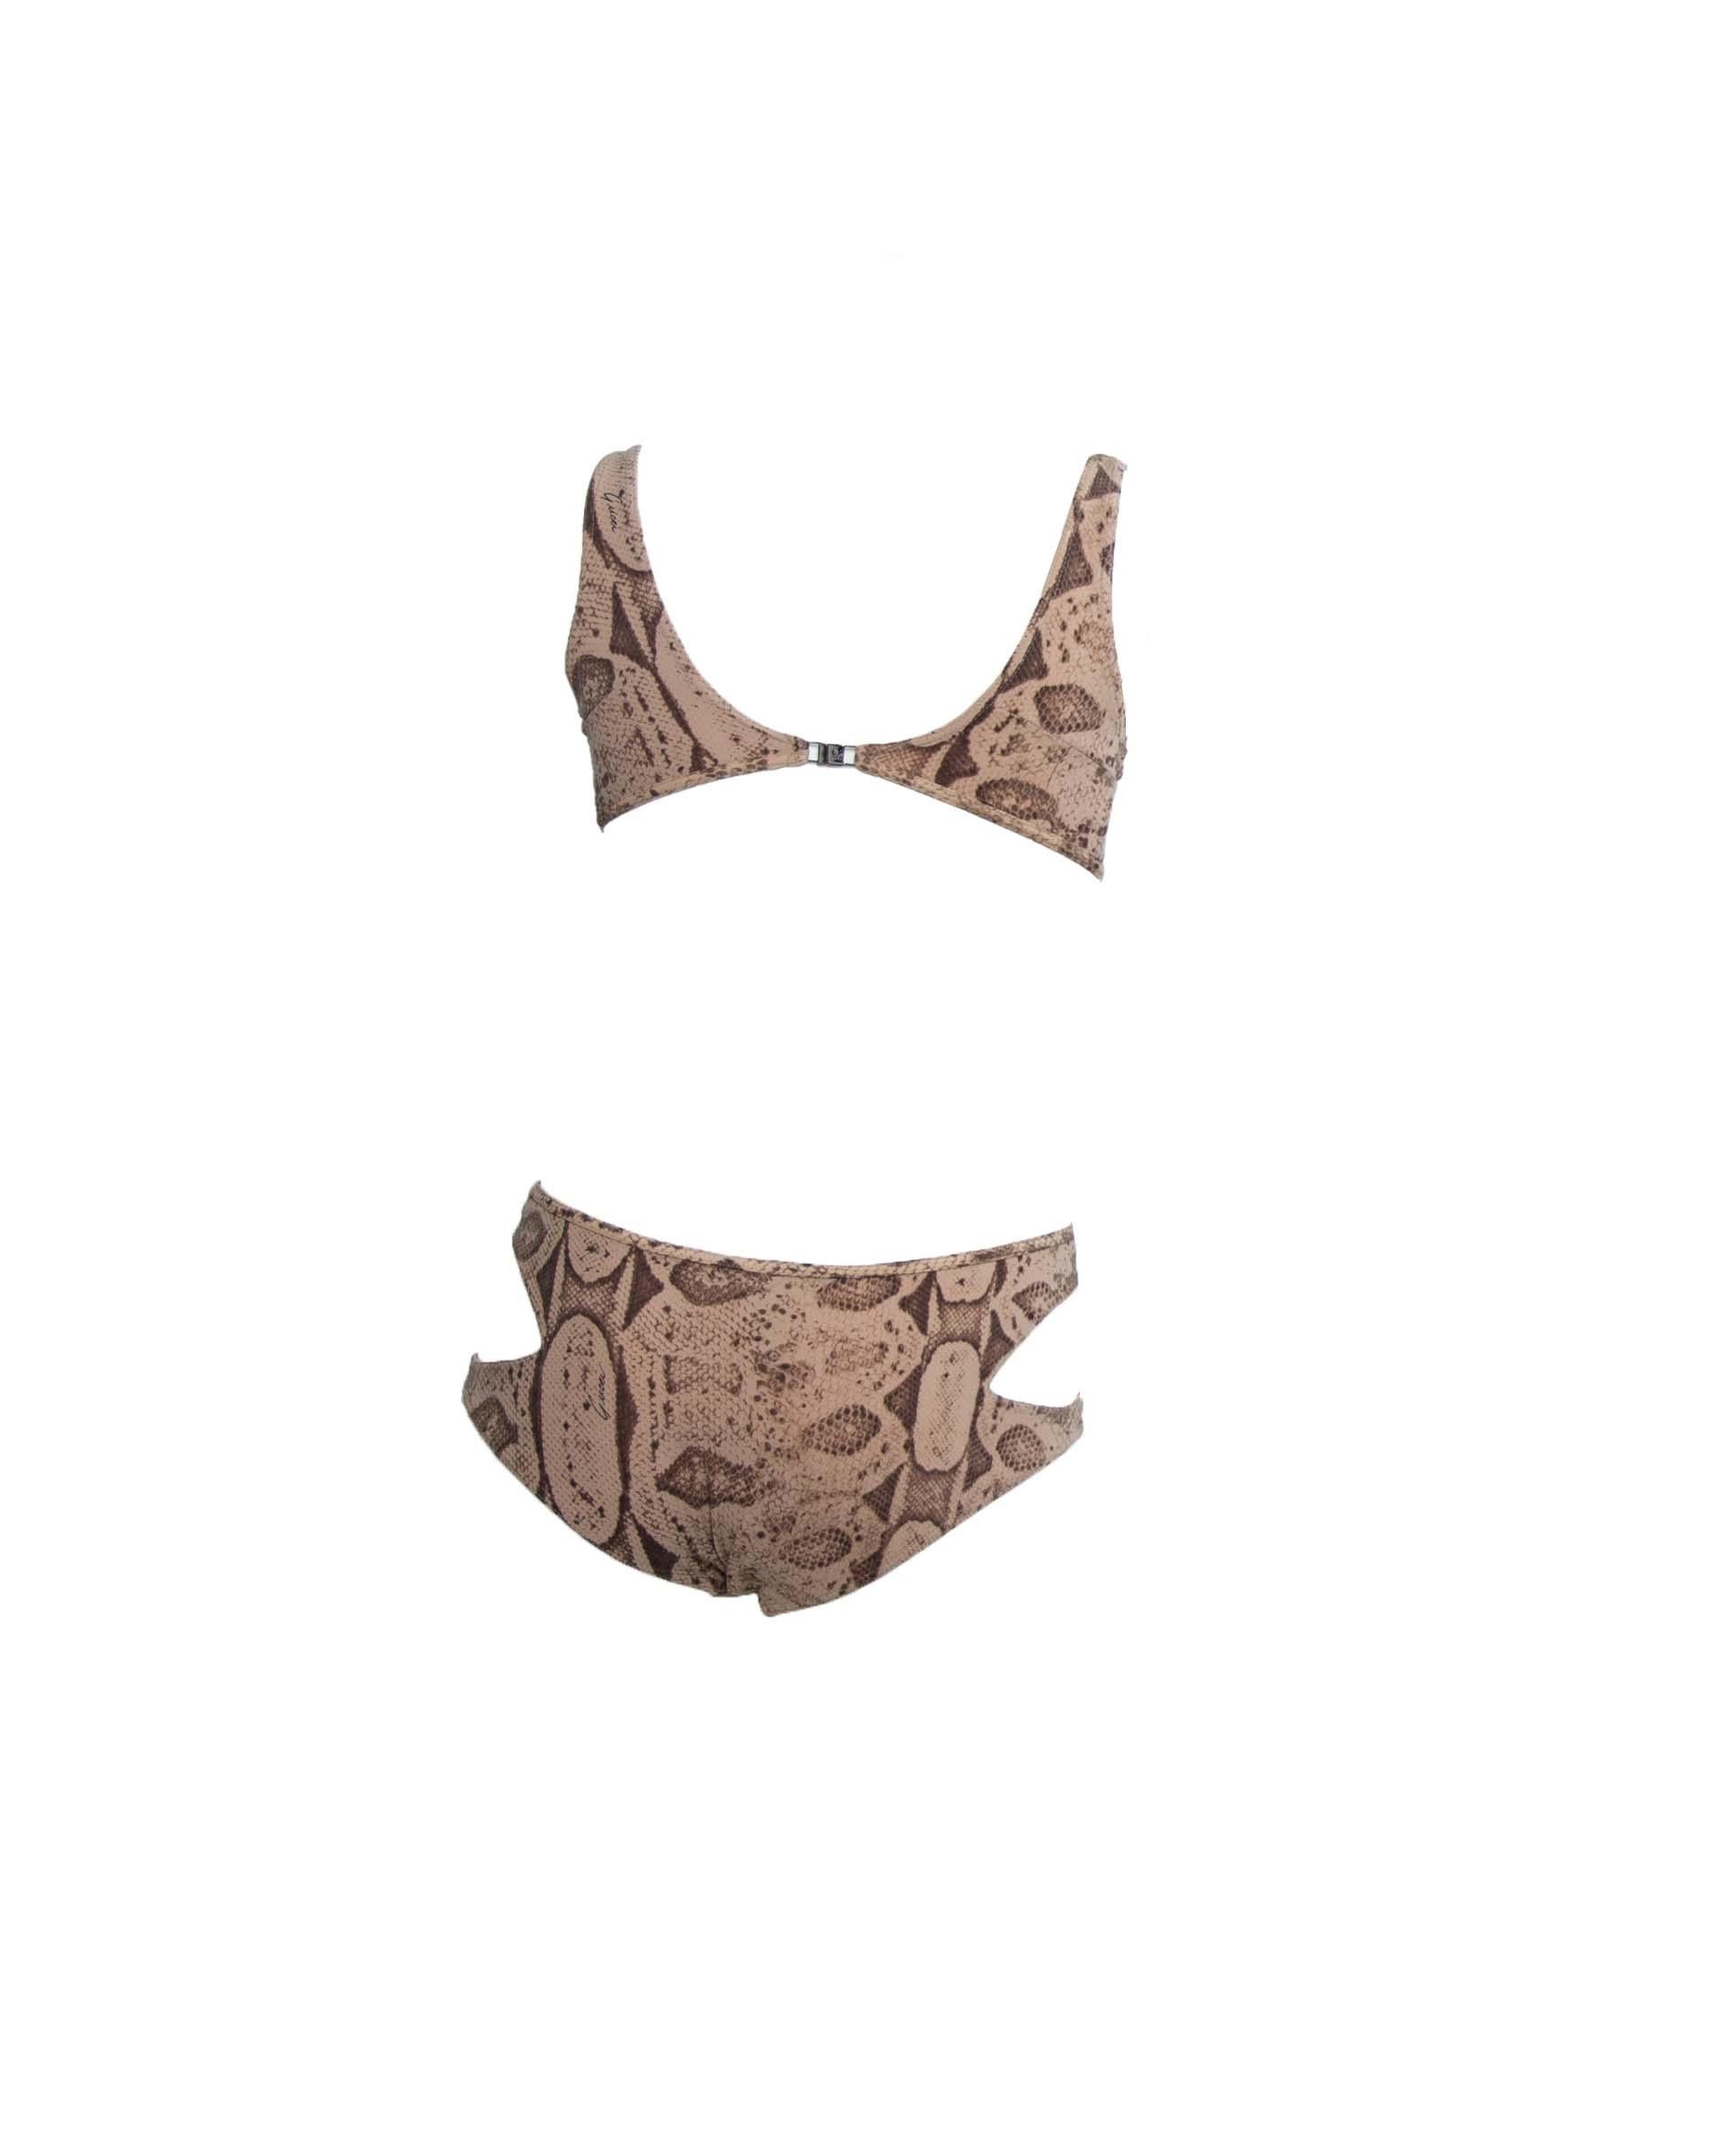 S/S 2000 Gucci by Tom Ford Snake Print One Piece Cutout Bathing Suit In Good Condition For Sale In West Hollywood, CA